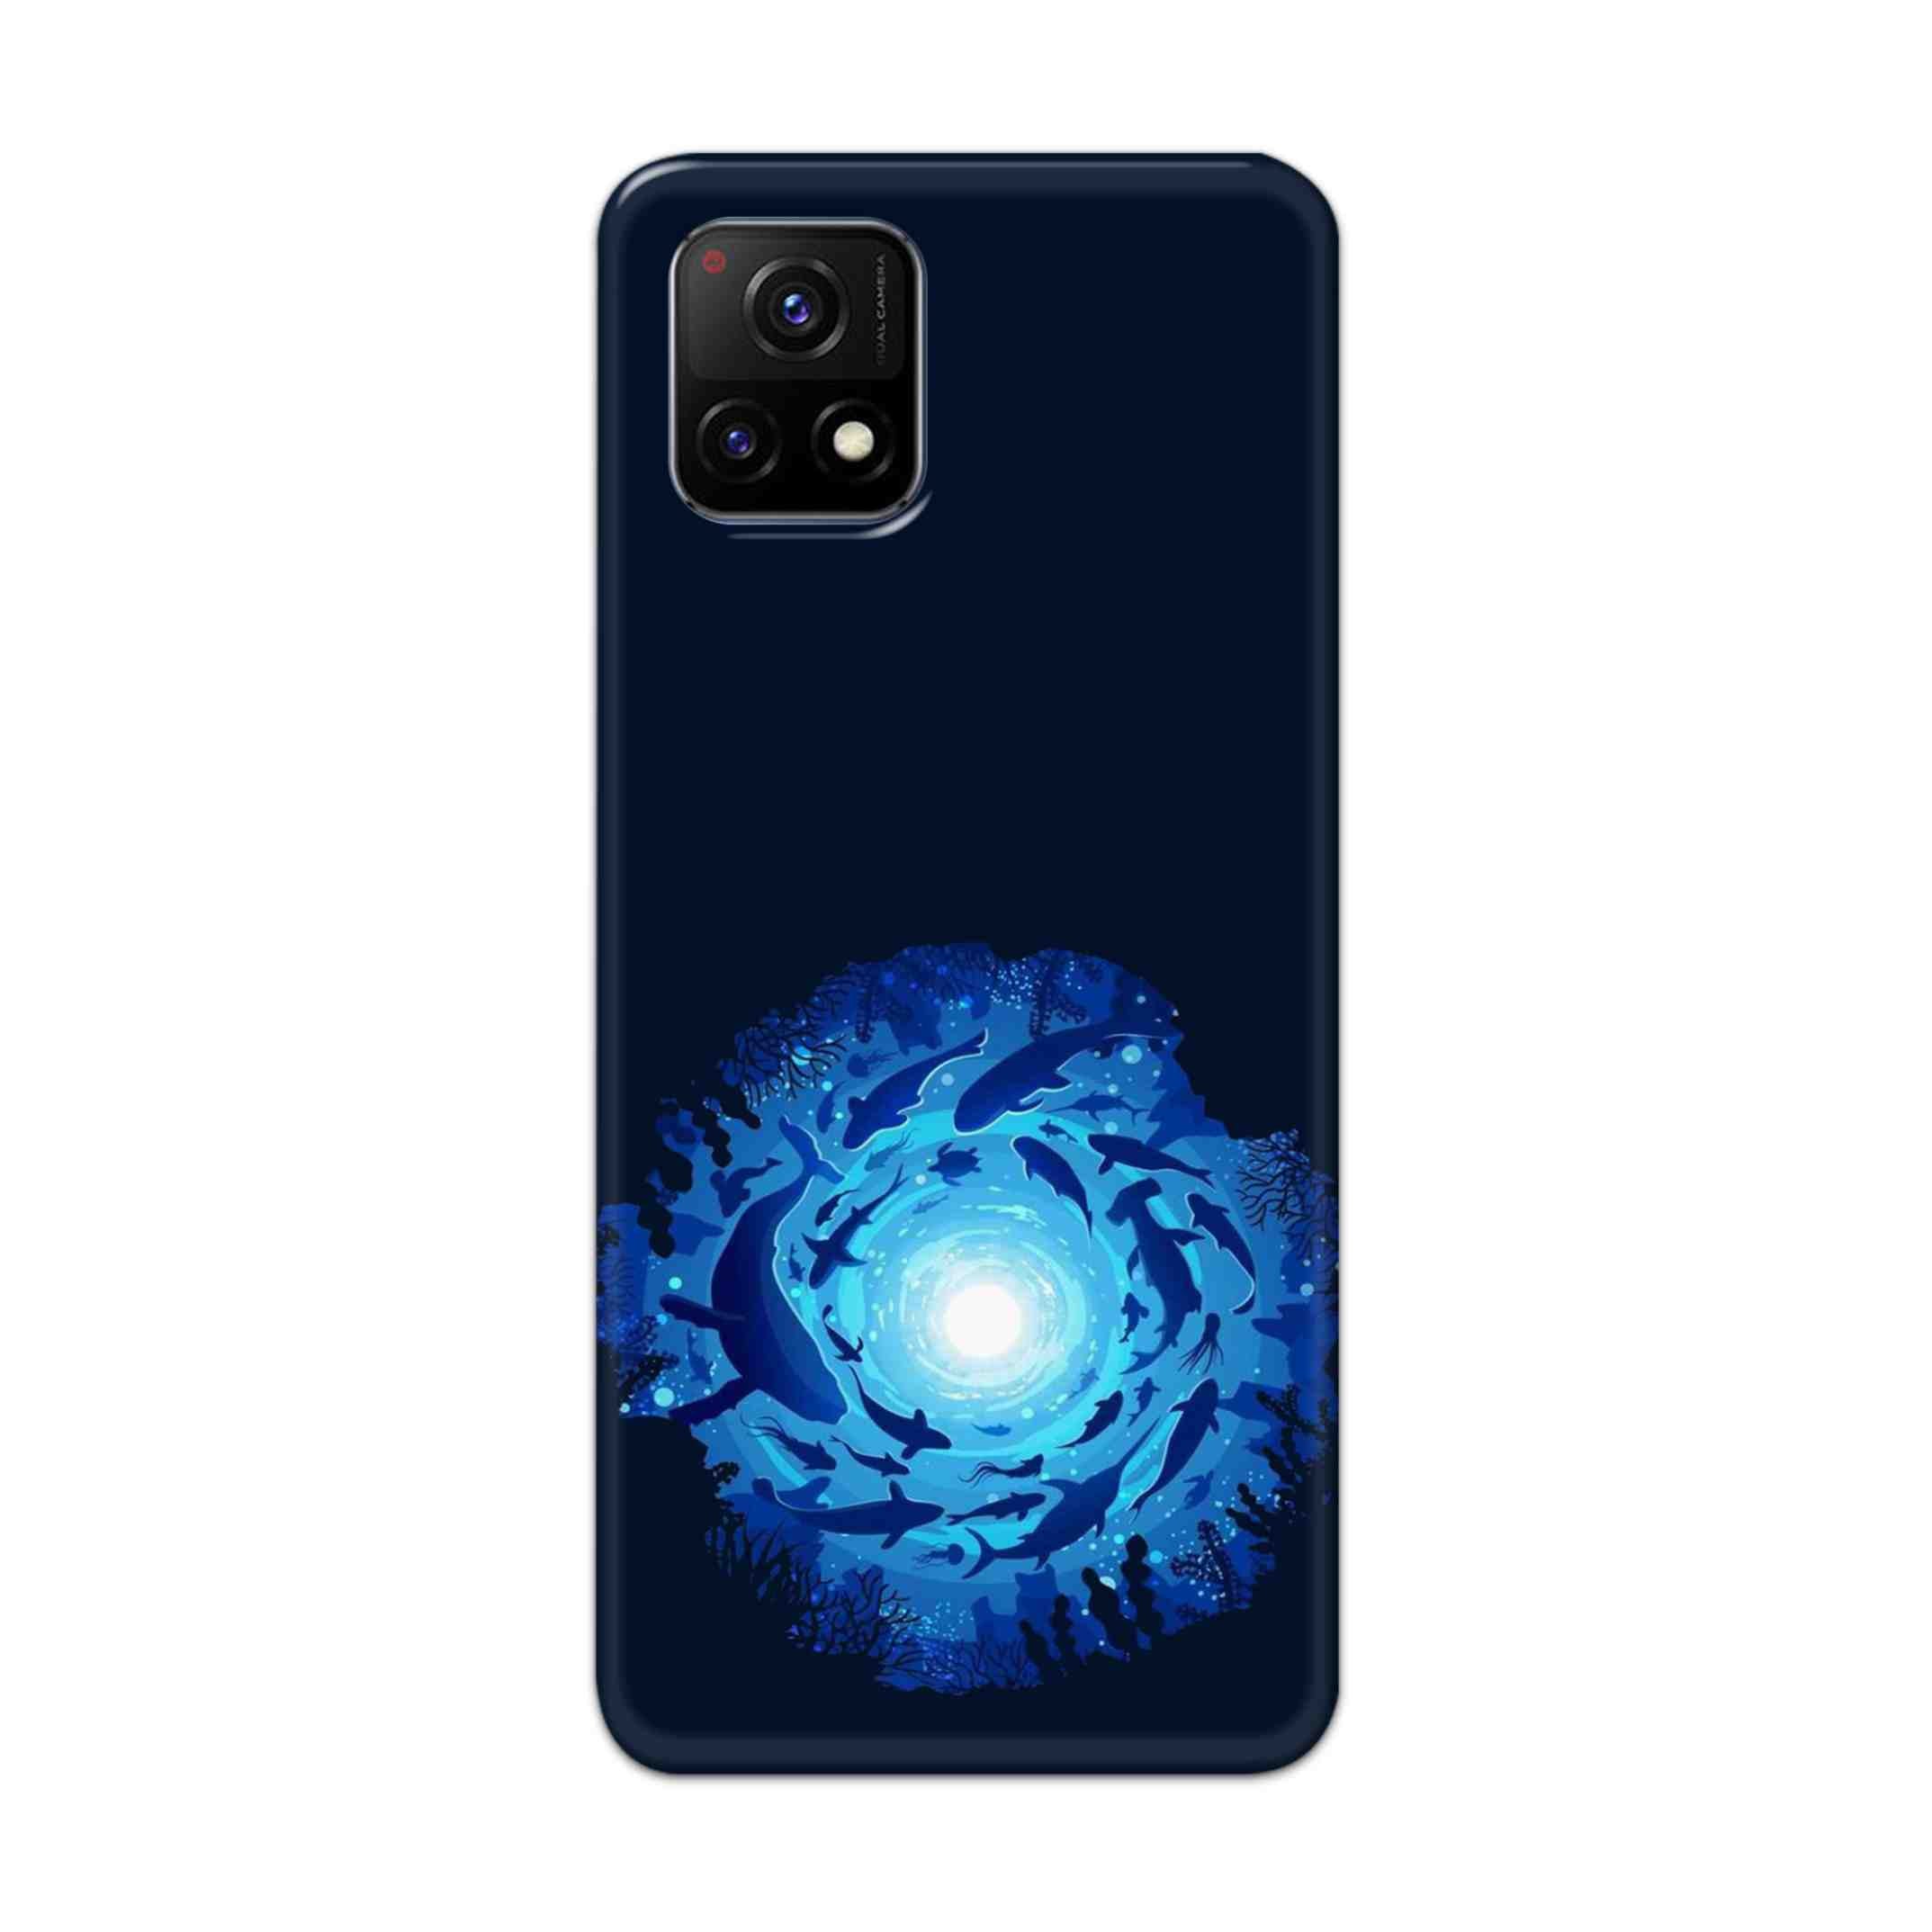 Buy Blue Whale Hard Back Mobile Phone Case Cover For Vivo Y72 5G Online